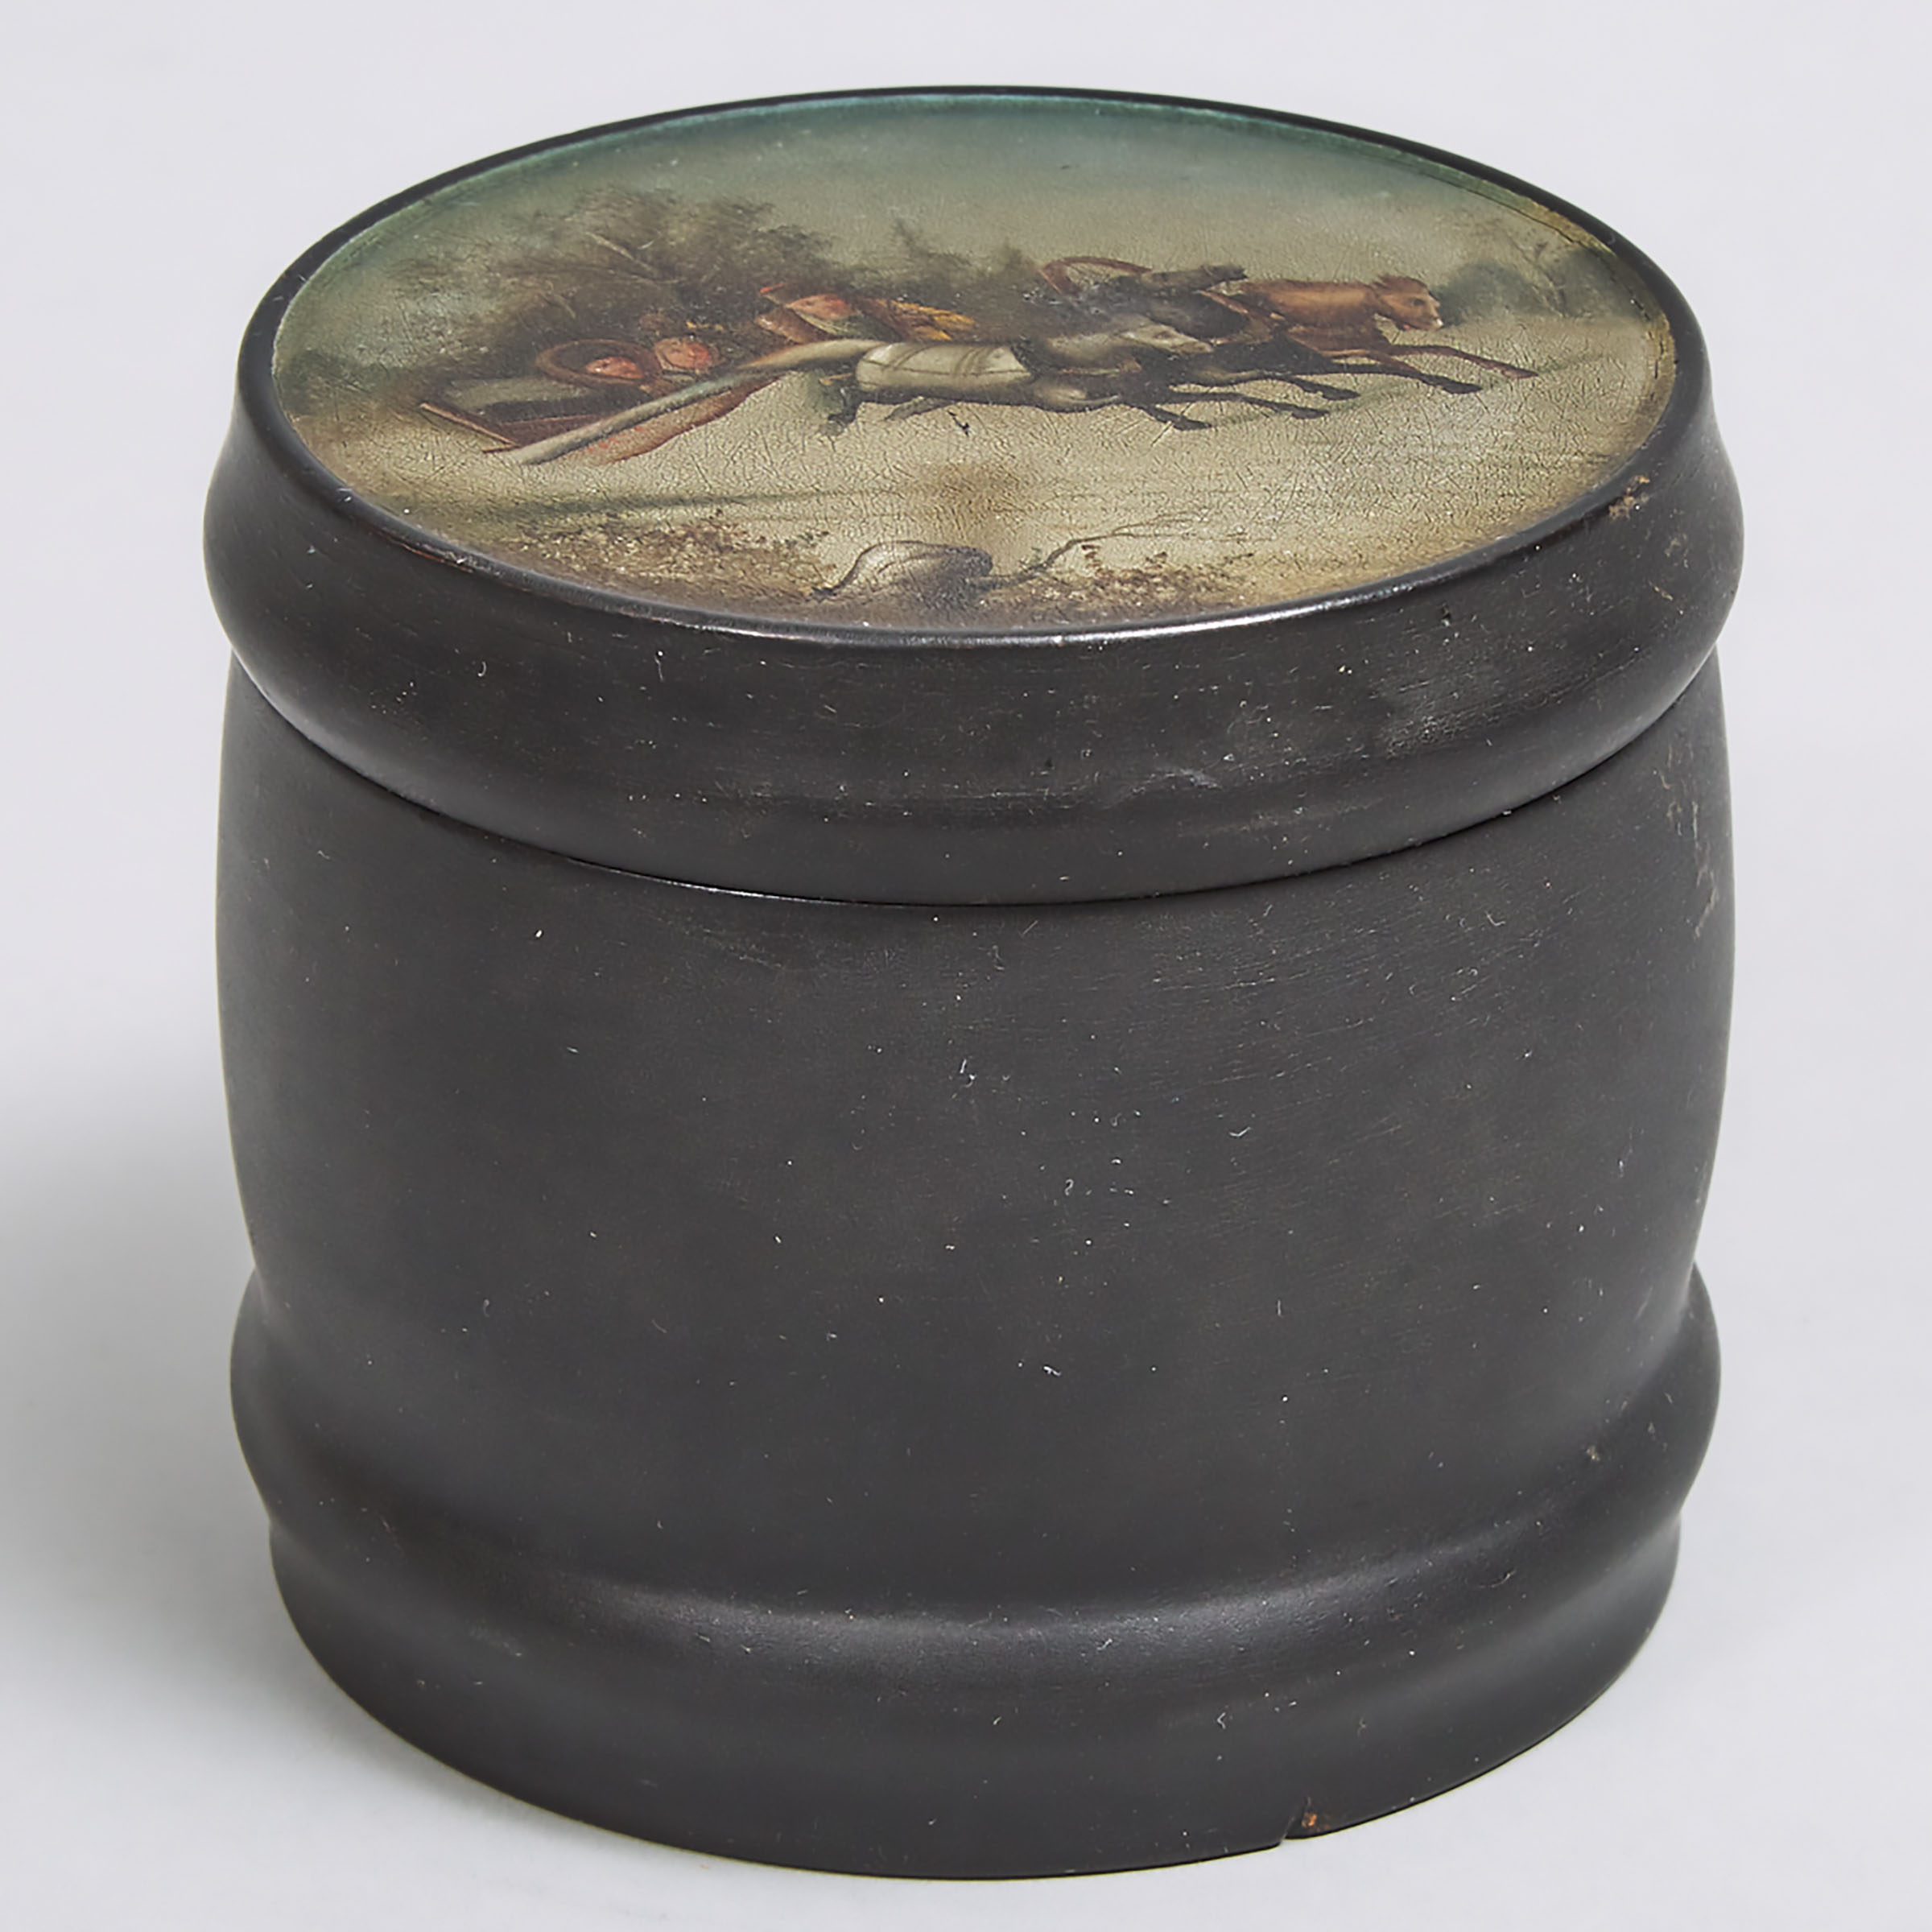 Russian Palekh Lacquer Tobacco Canister, c.1900